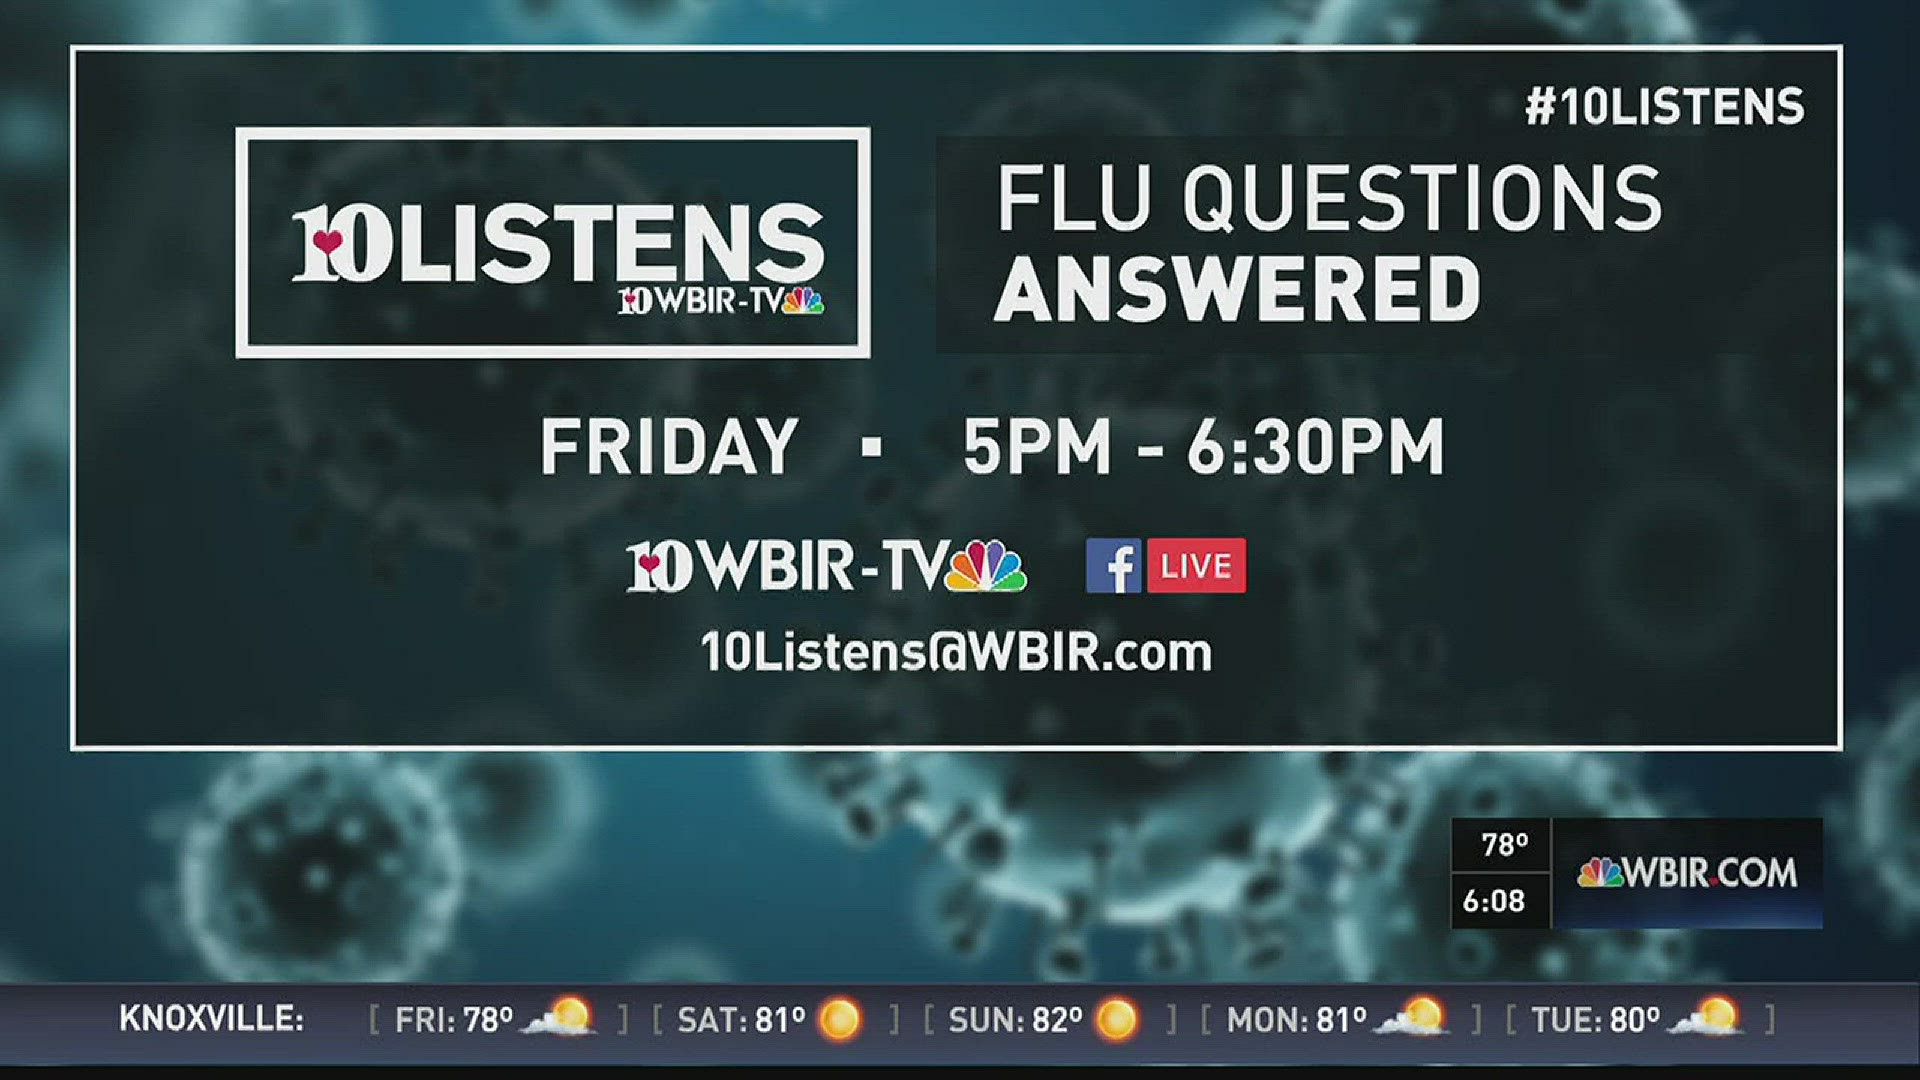 Flu season is here, and WBIR wants to help protect you and your family. Join us Friday for a 10Listens expert phone bank answering your flu questions.